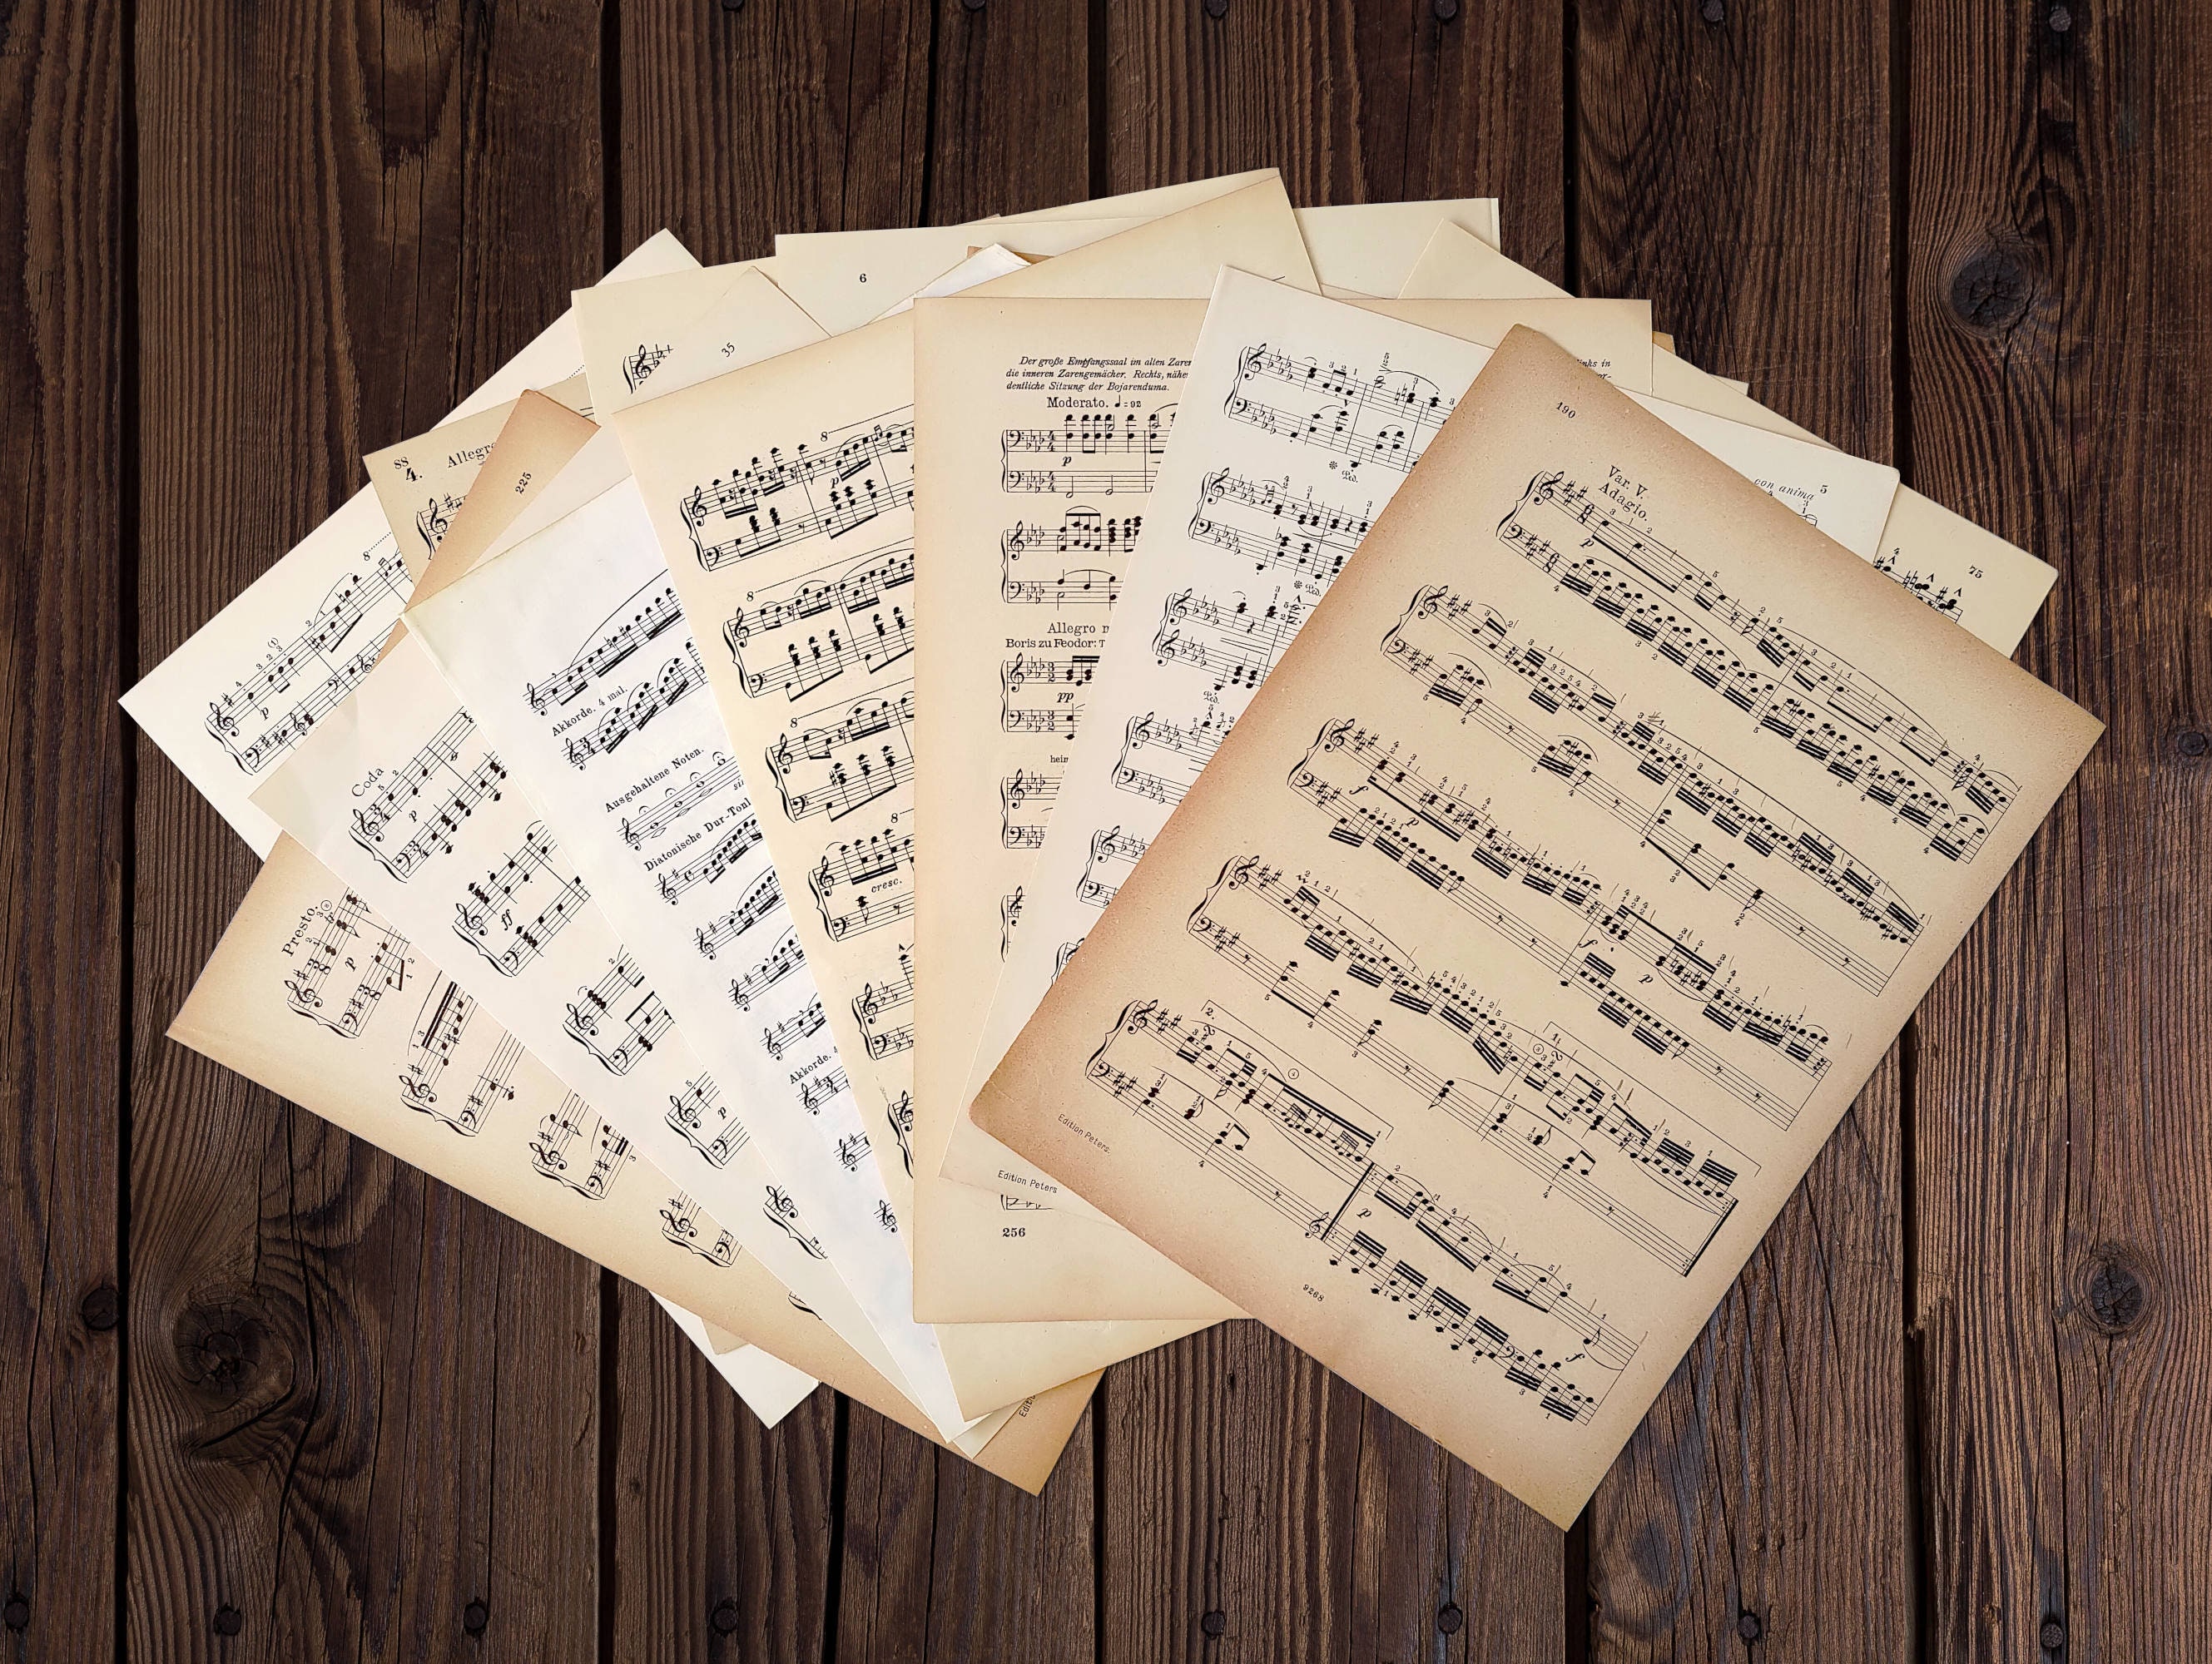 20 Sheets Vintage Music Paper Music Sheets Music Paper for